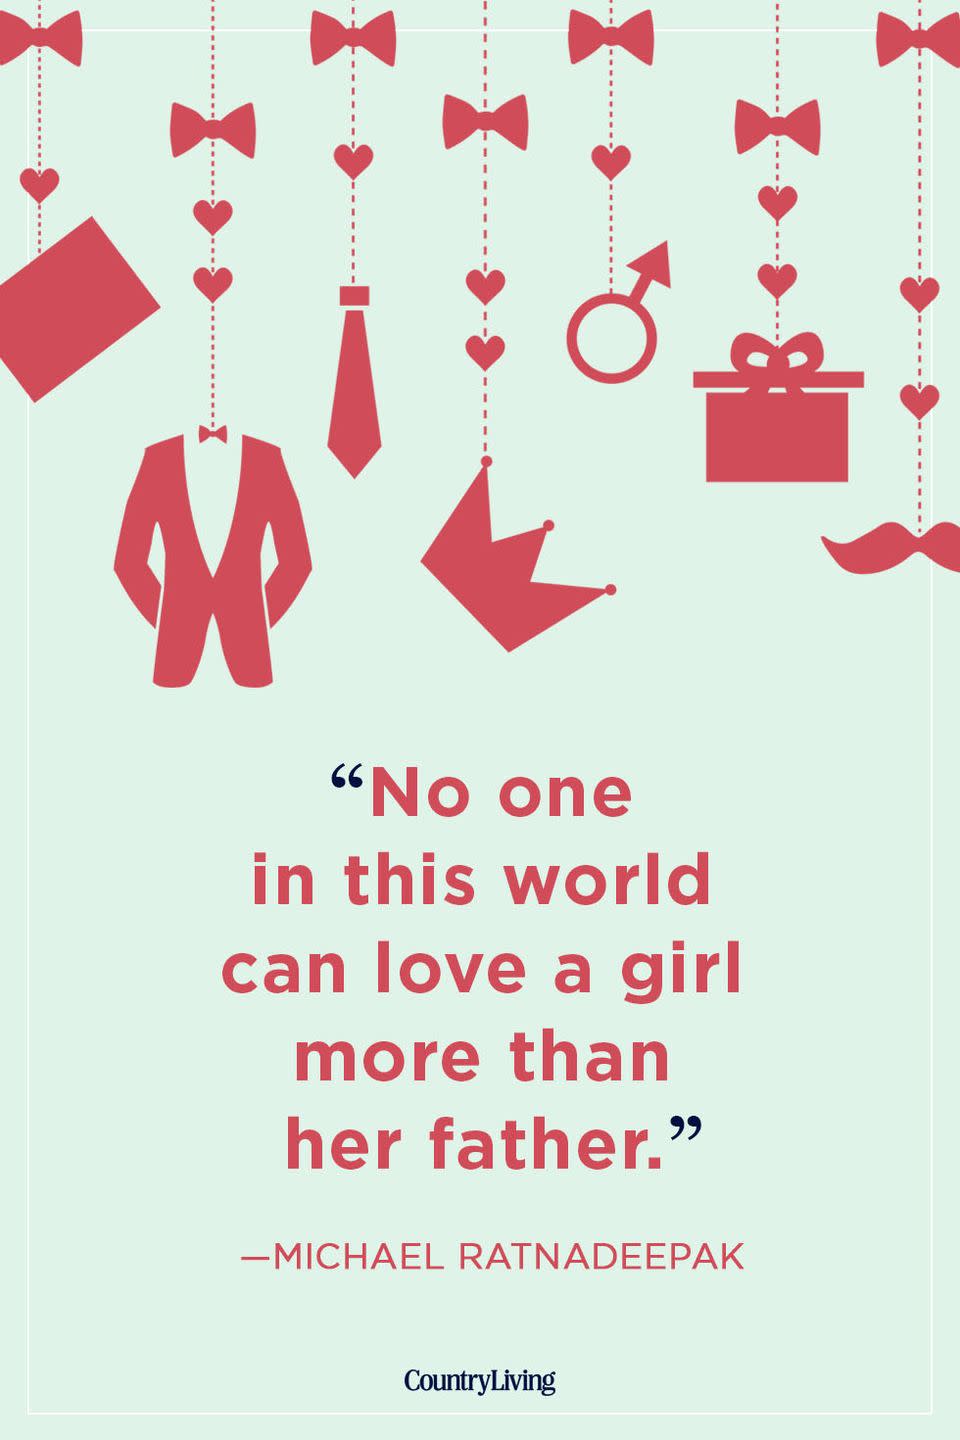 <p>“No one in this world can love a girl more than her father.”</p>